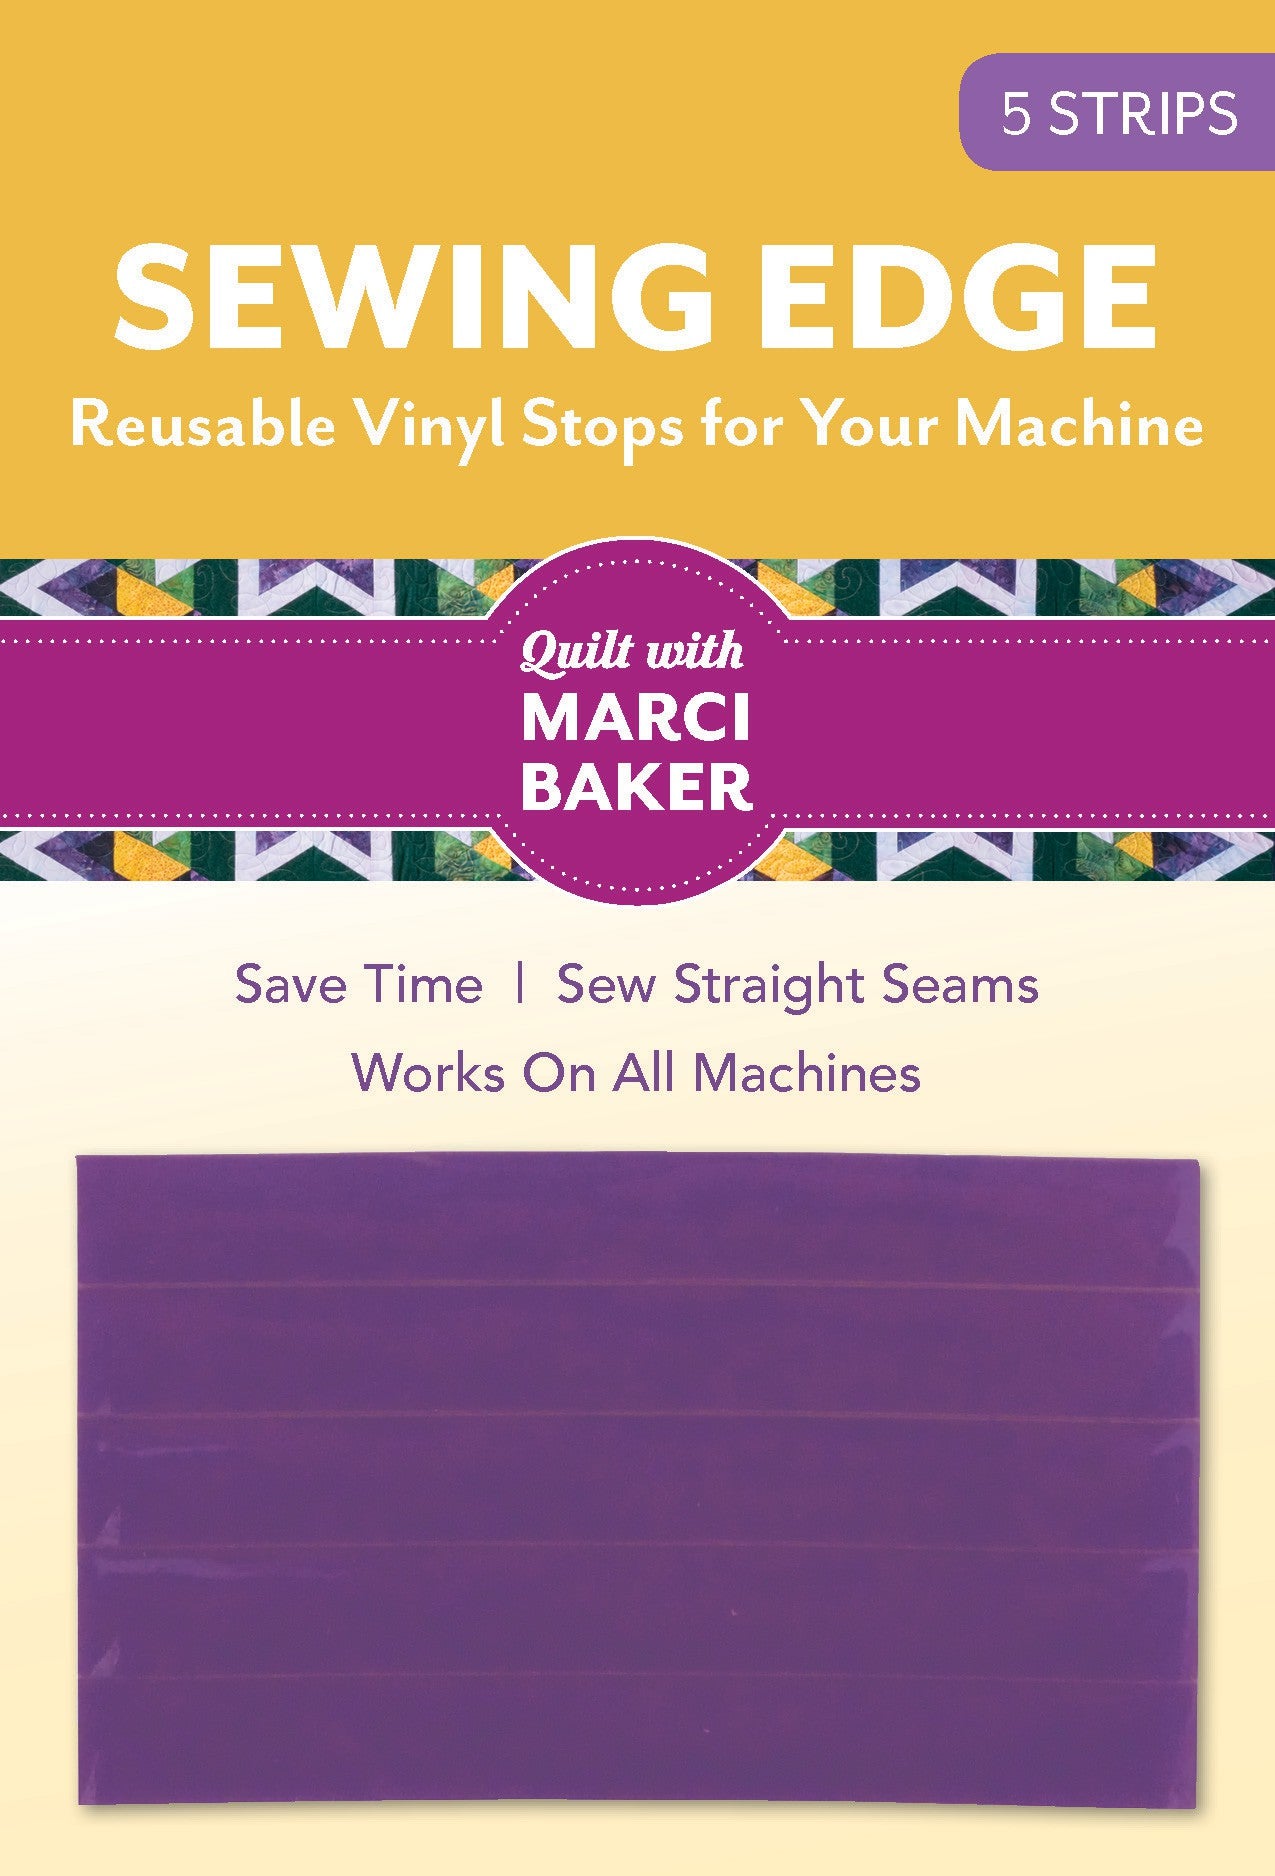 Sewing Edge Reusable Vinyl Stops For Your Machine, 5 Strips from Quilt with Marci Baker